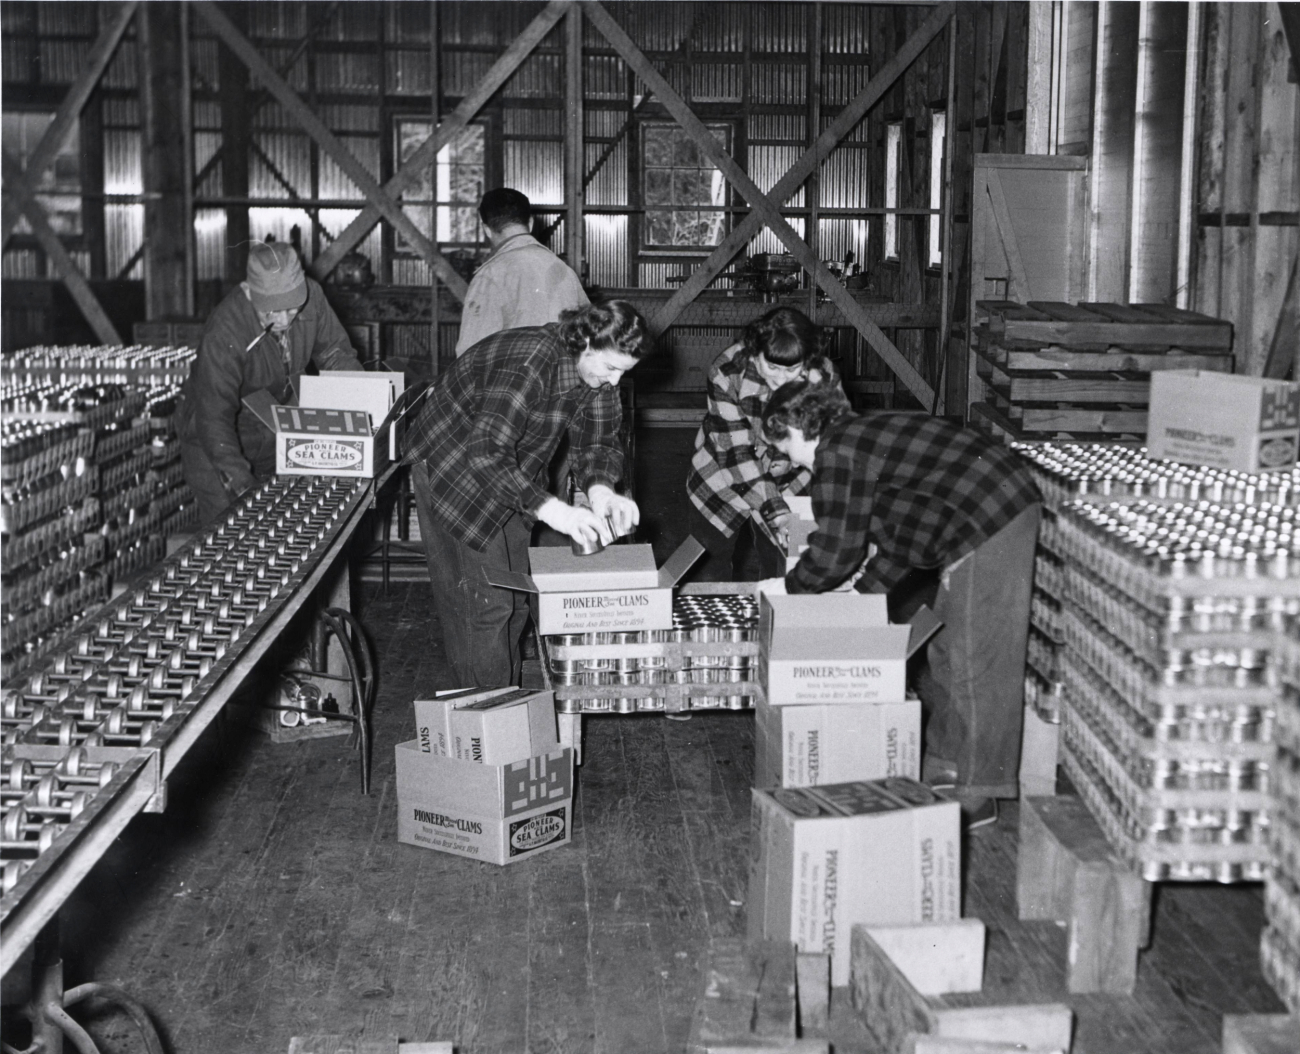 Cans of Pioneer Sea Clams being readied for shipment